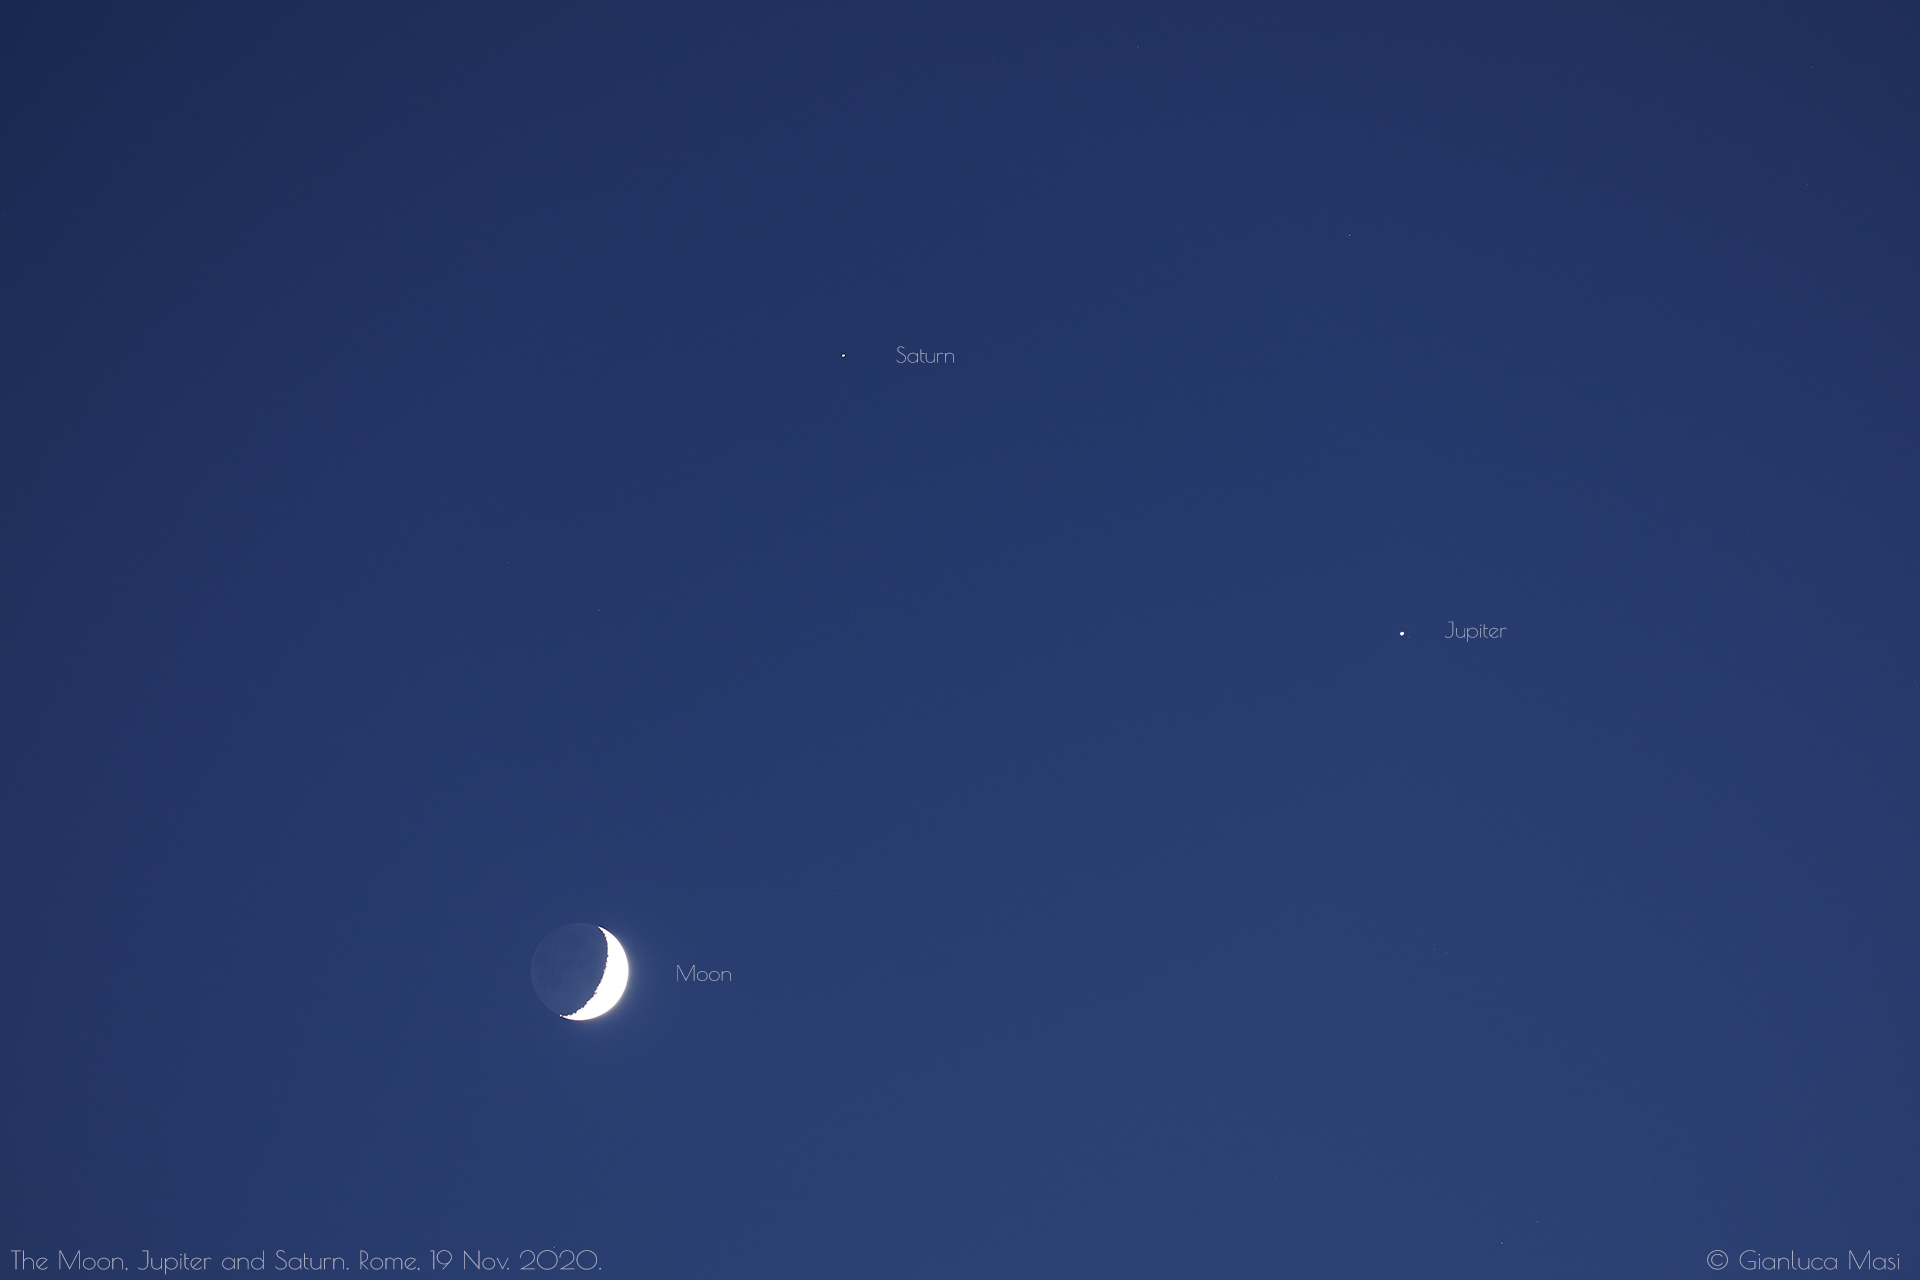 The Moon, Jupiter and Saturn properly labelled.